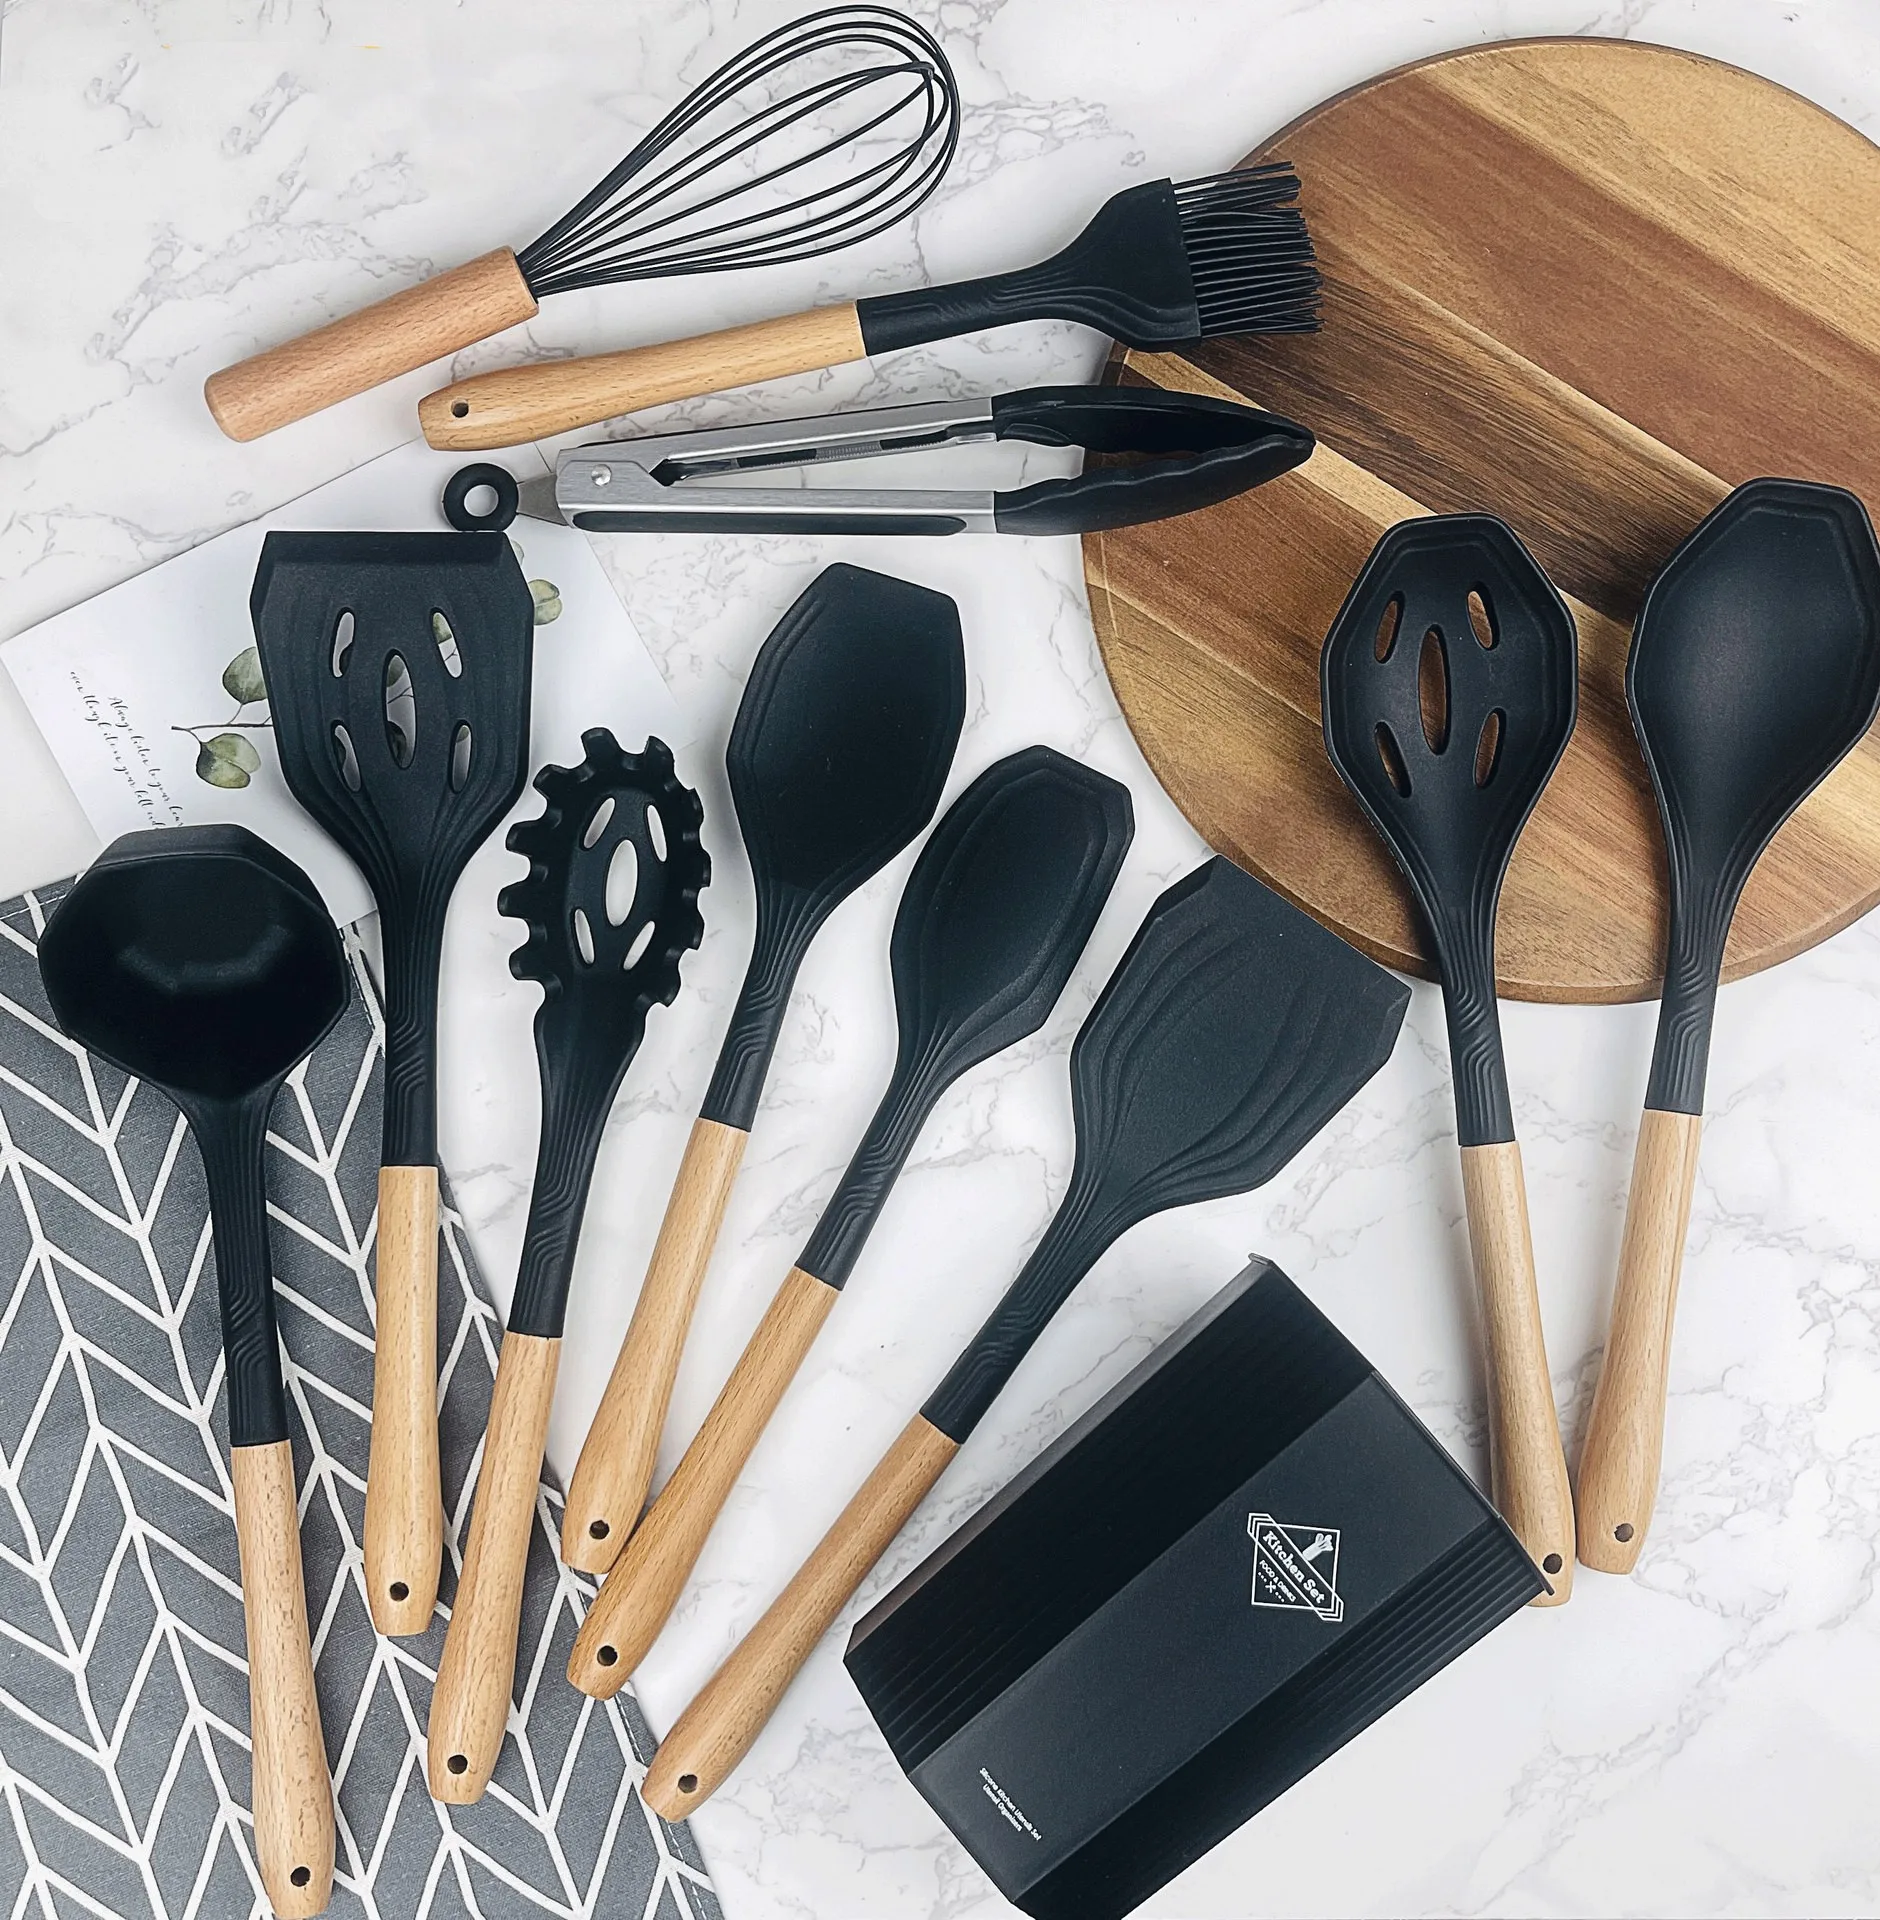 33-Piece Custom Kitchen Set with Silicone Spatula and Wood Handle Hook for Home or Picnic Serving Utensils